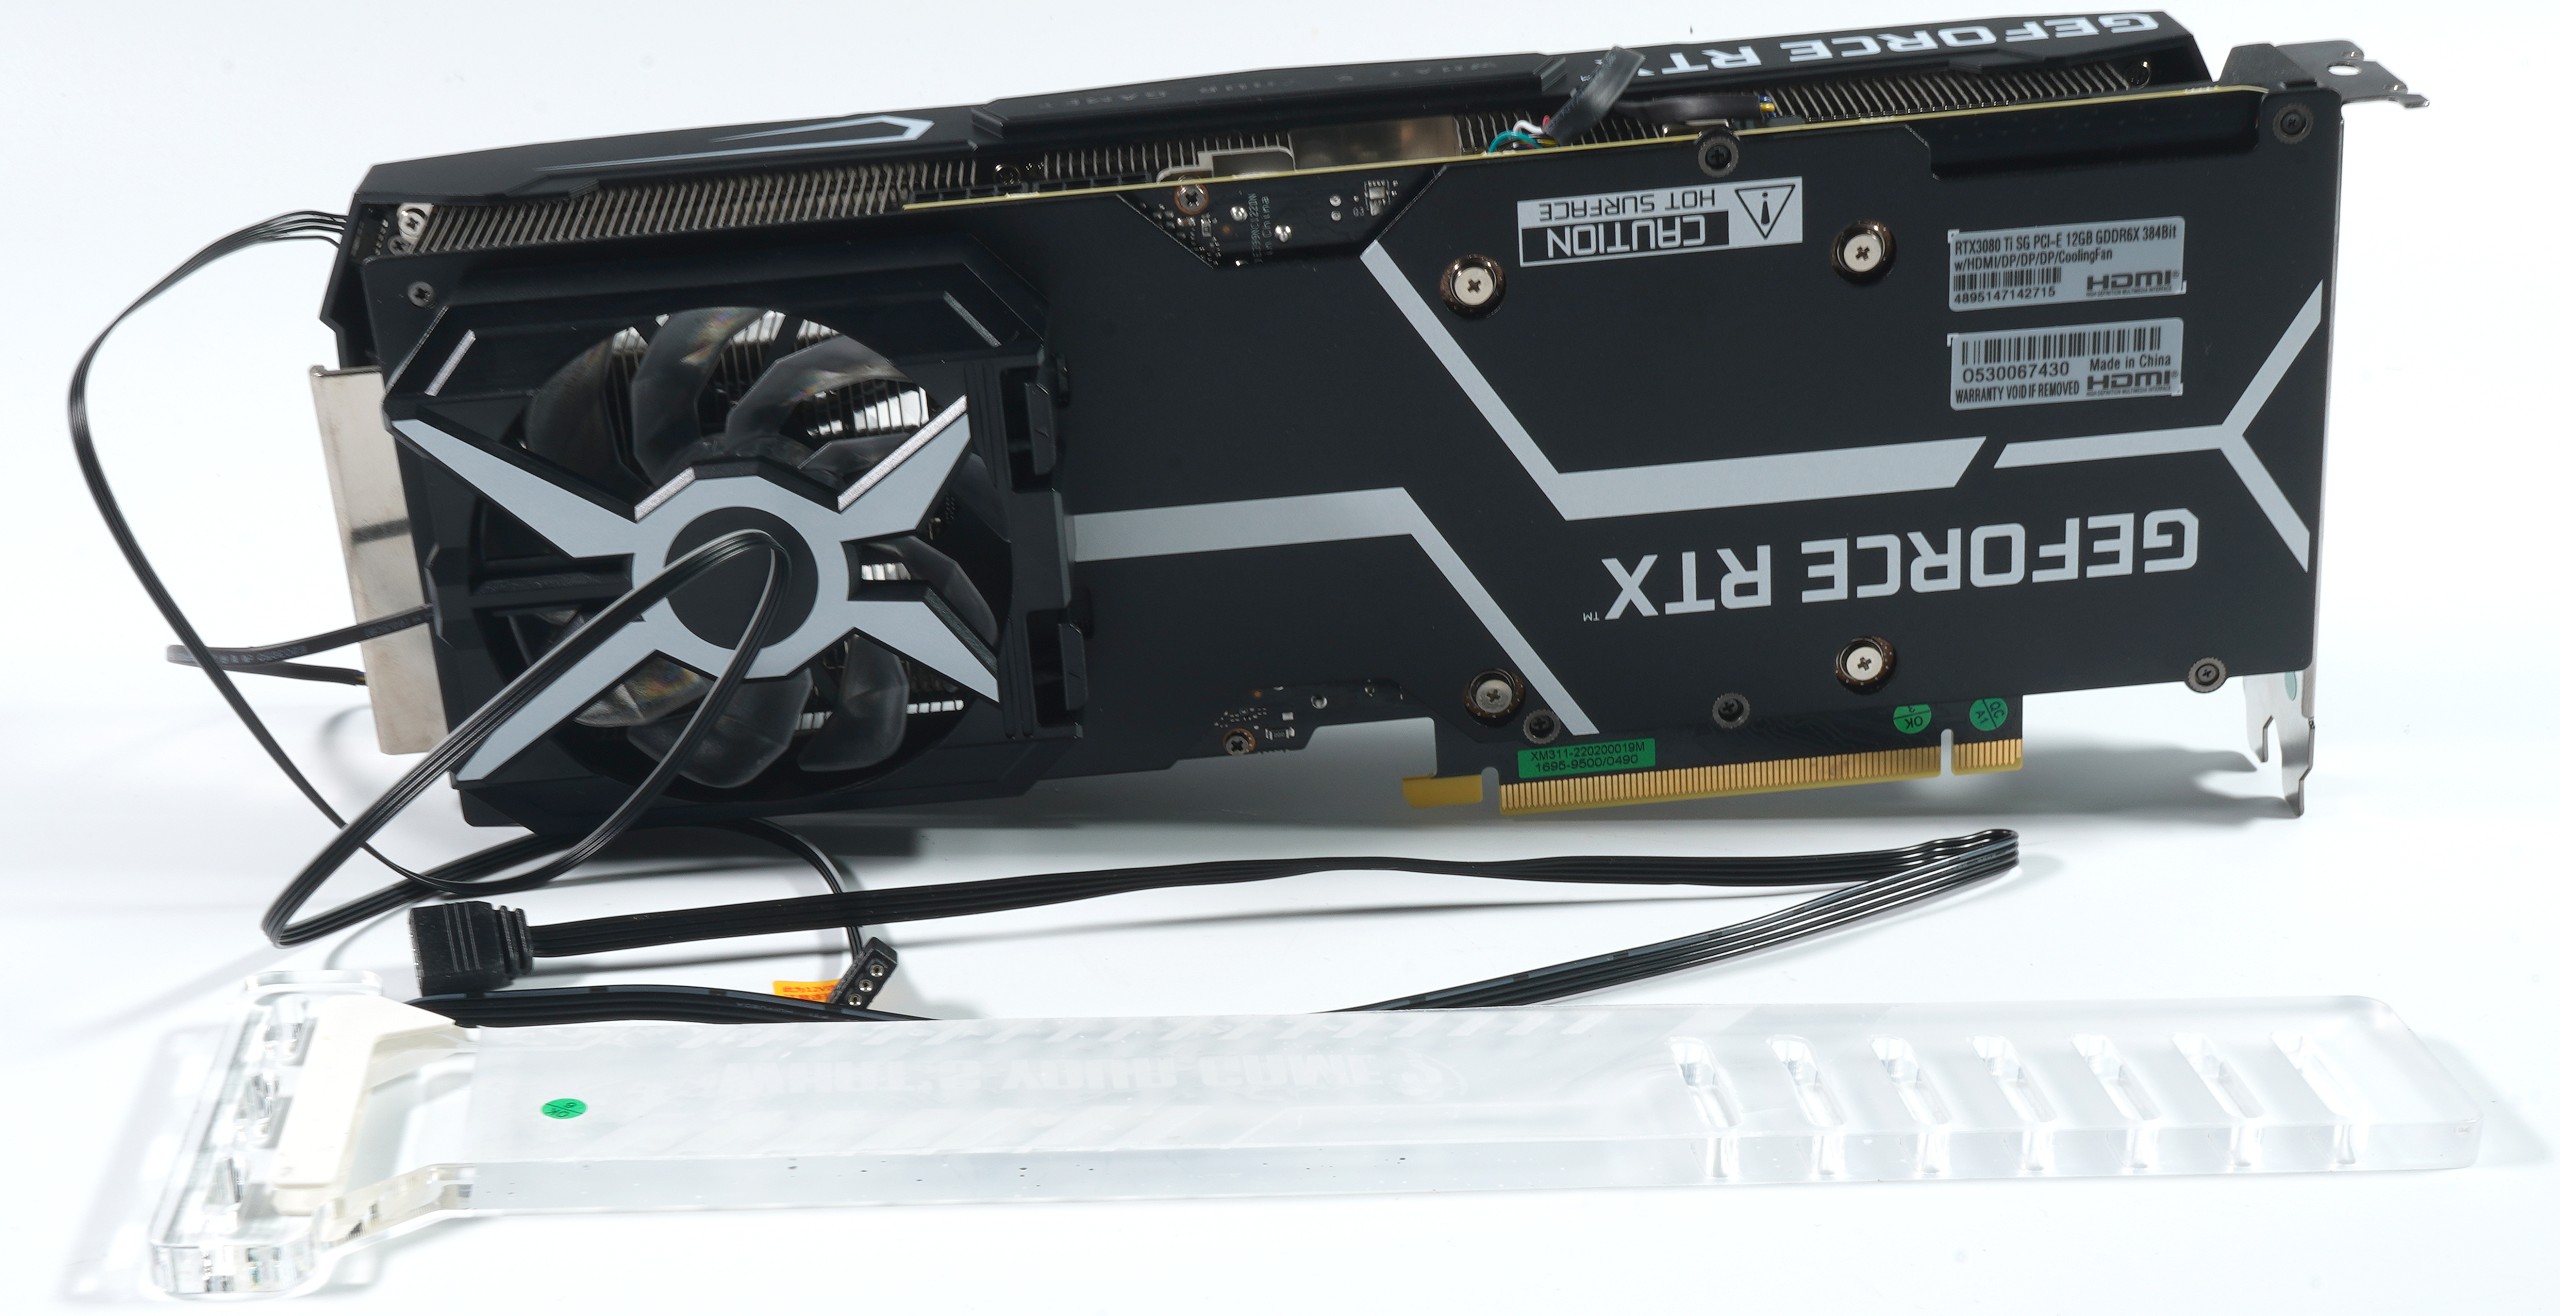 KFA2 GeForce RTX 3080 SG 10 GB in test - not quite as quiet, but really  cool, Page 6